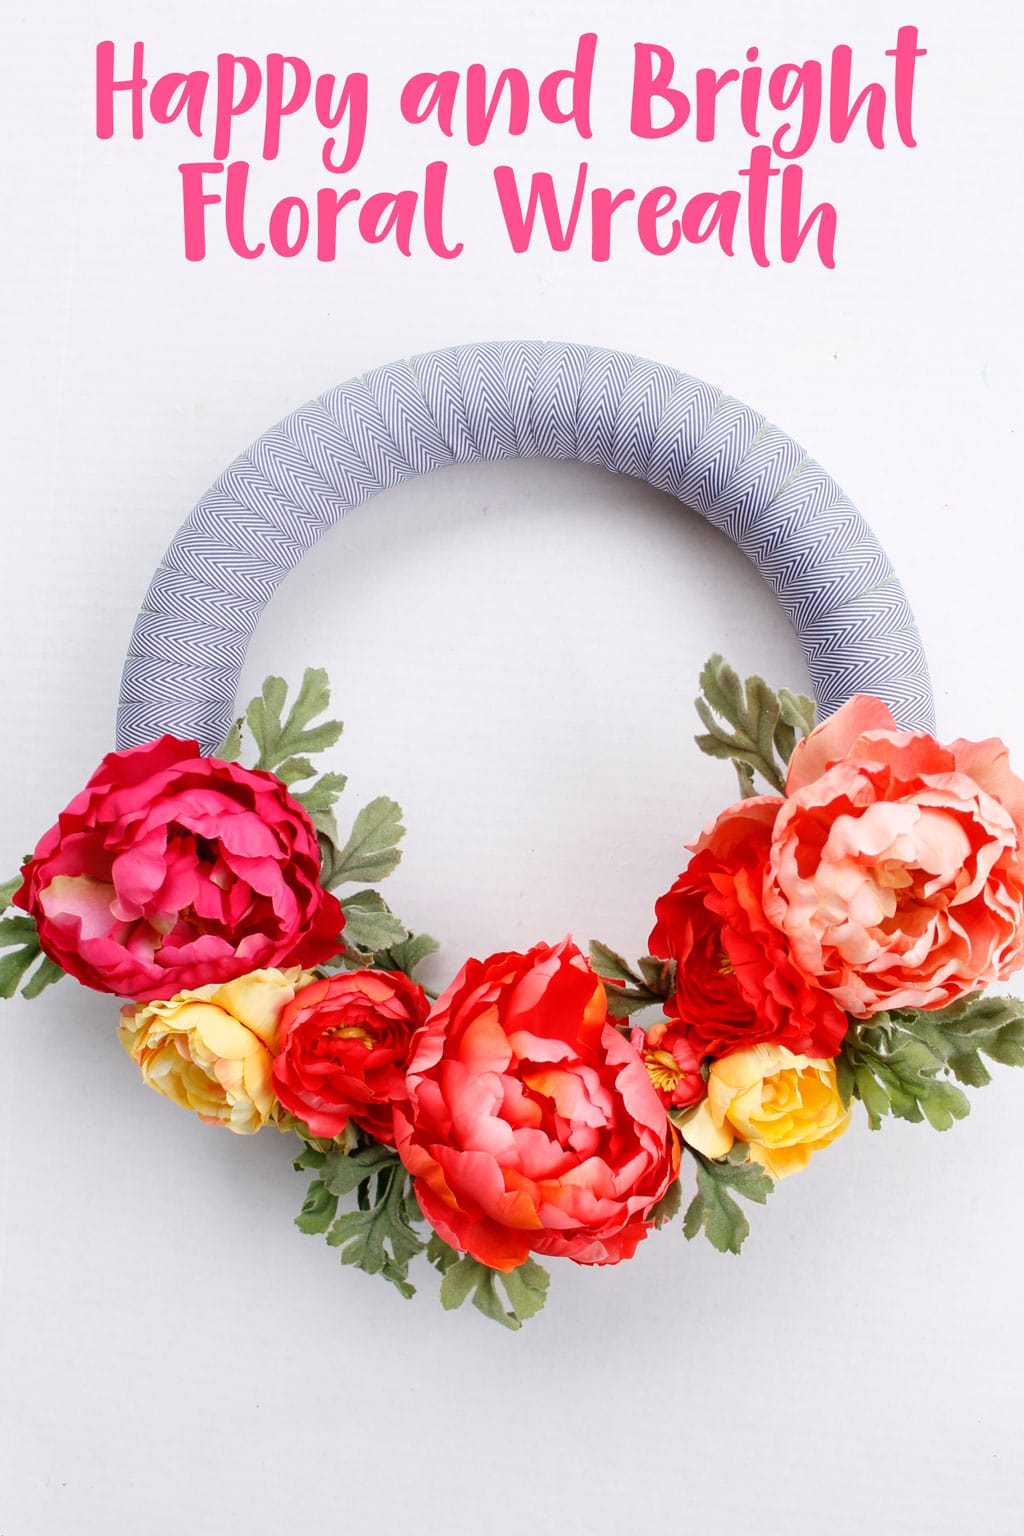 Freshen up your house with this Happy and Bright Floral Wreath. This wreath comes together quickly and is a fun addition to any home decor. #floralwreath #wreathdiy #springwreath #summerwreath